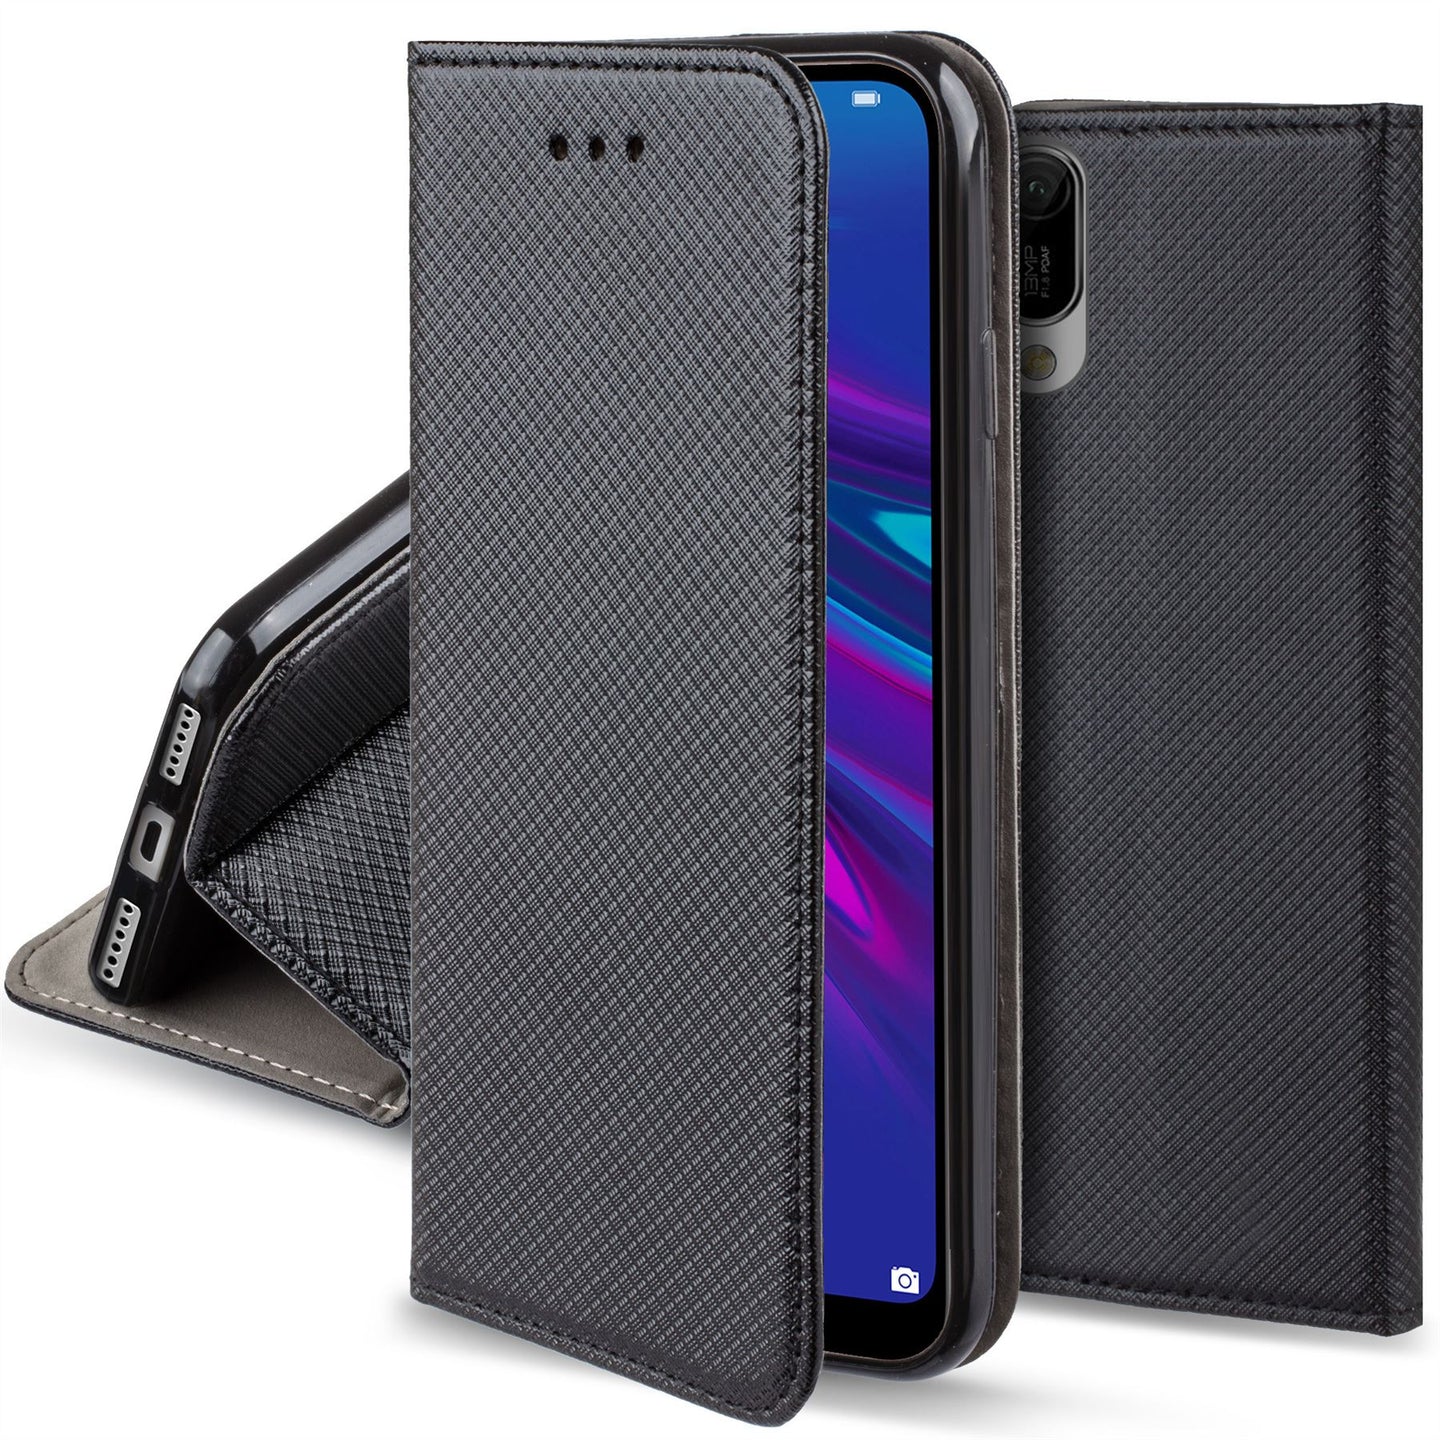 Moozy Case Flip Cover for Huawei Y6 2019, Black - Smart Magnetic Flip Case with Card Holder and Stand